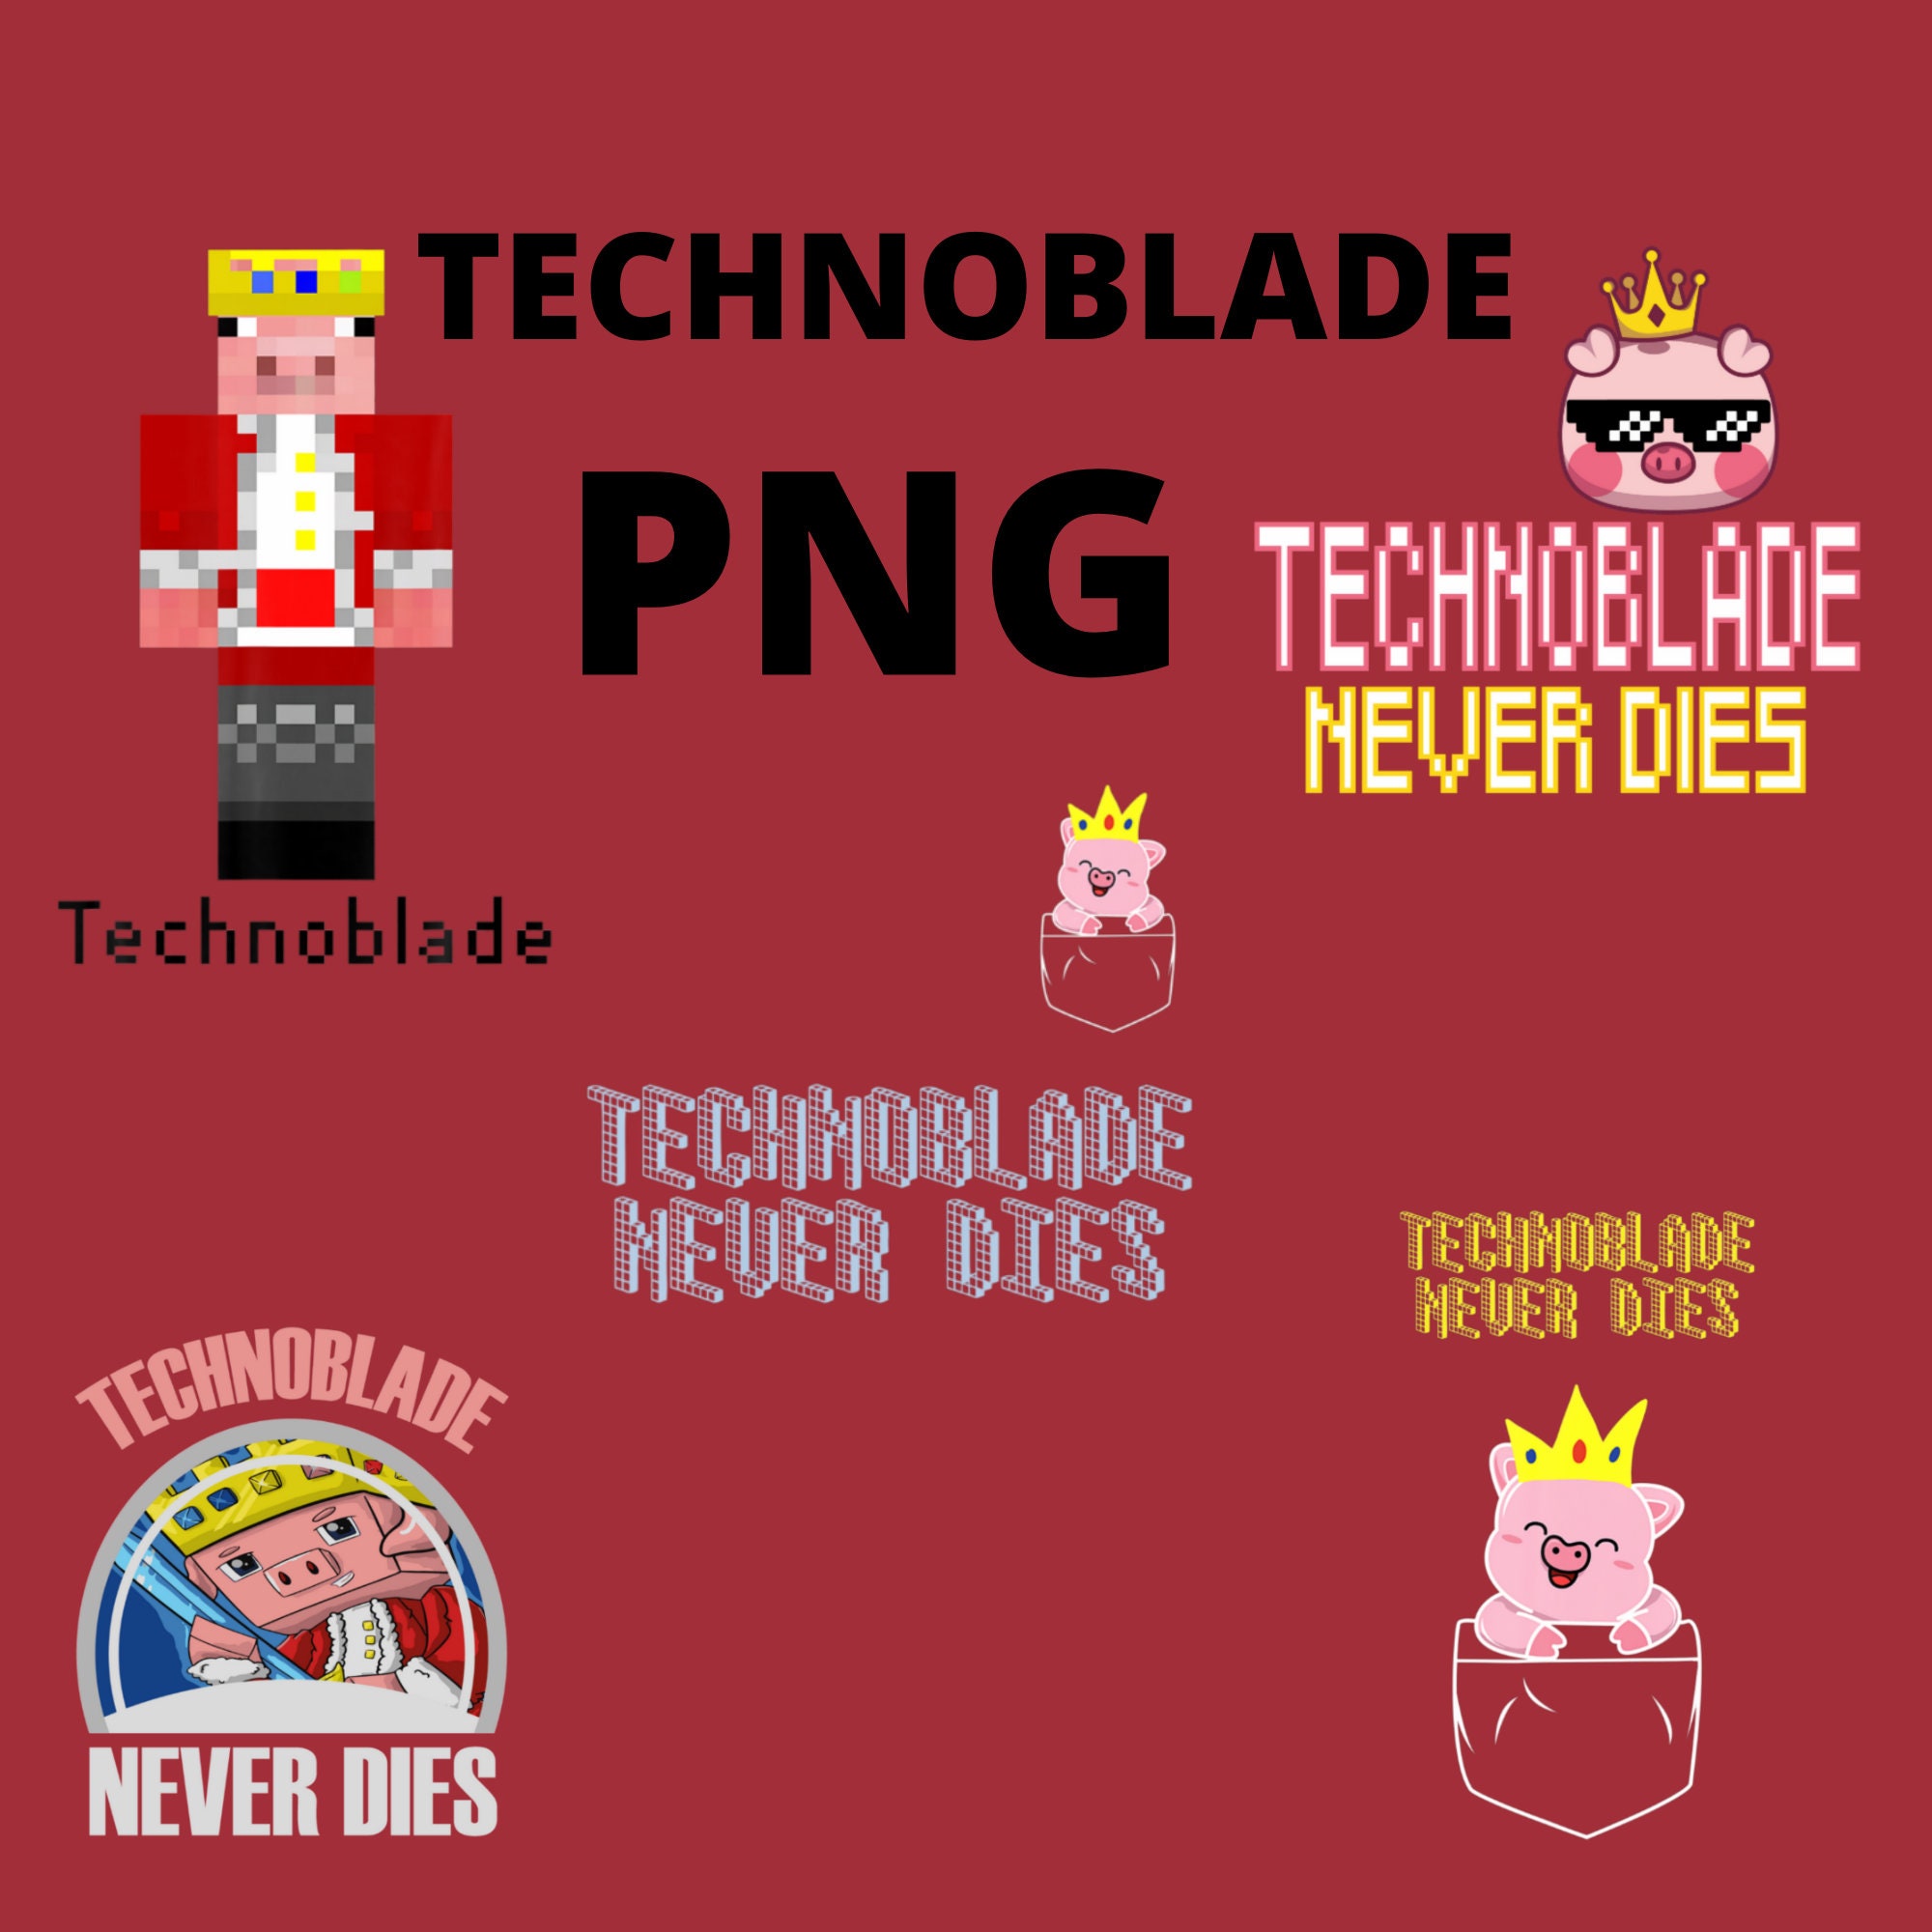 Technoblade Never Dies! Or Does He? - 25 • Why are car rides so